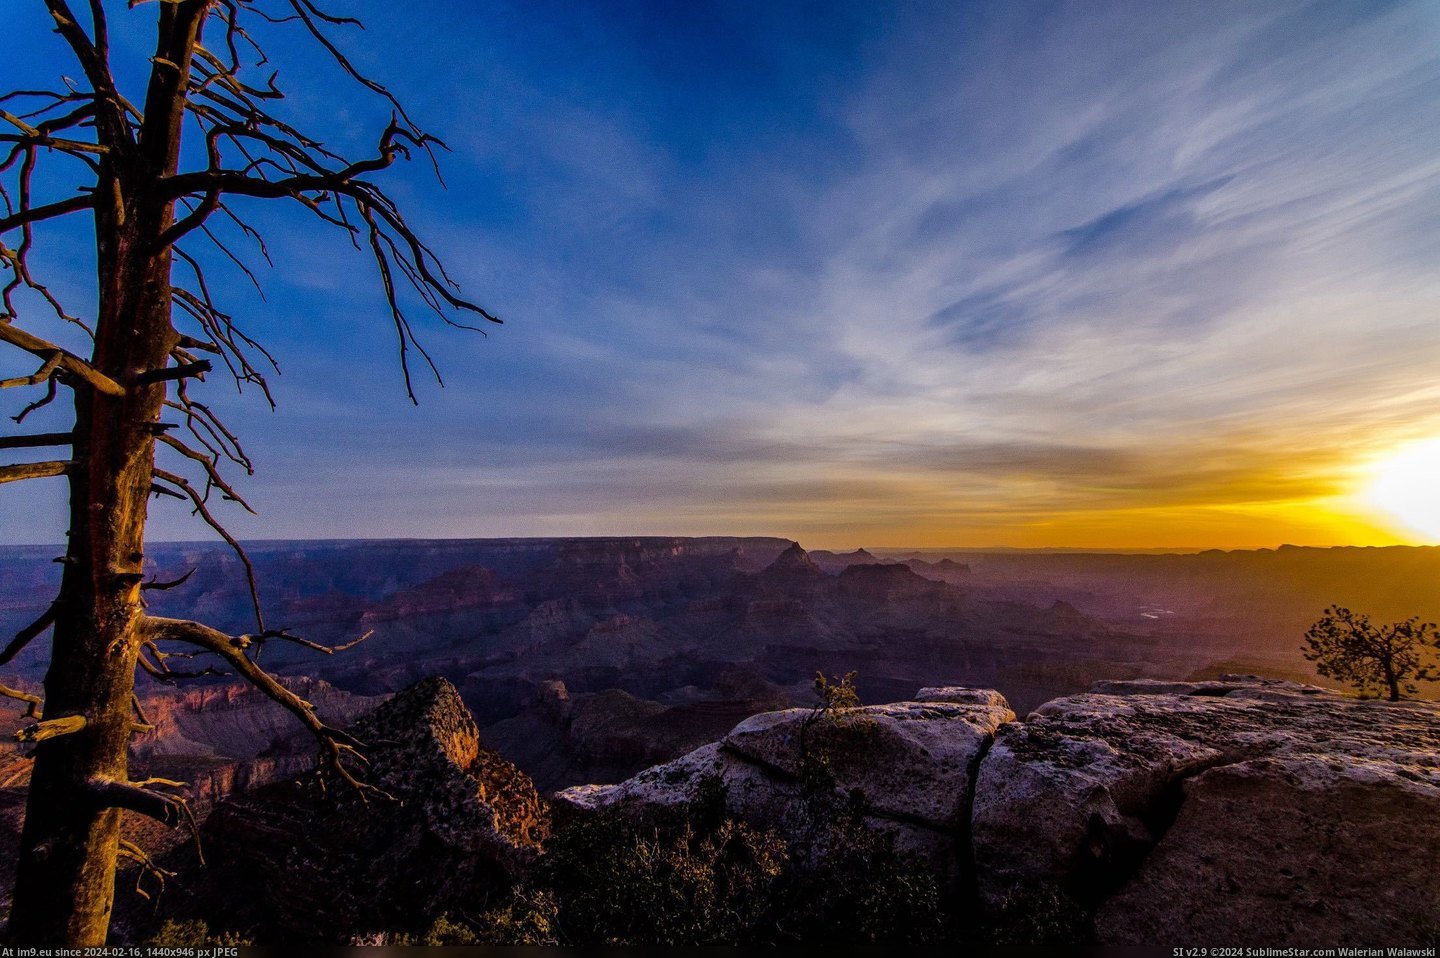 [Earthporn] Grand Canyon sunrise 5-20-2015 [4928x3264] (in My r/EARTHPORN favs)